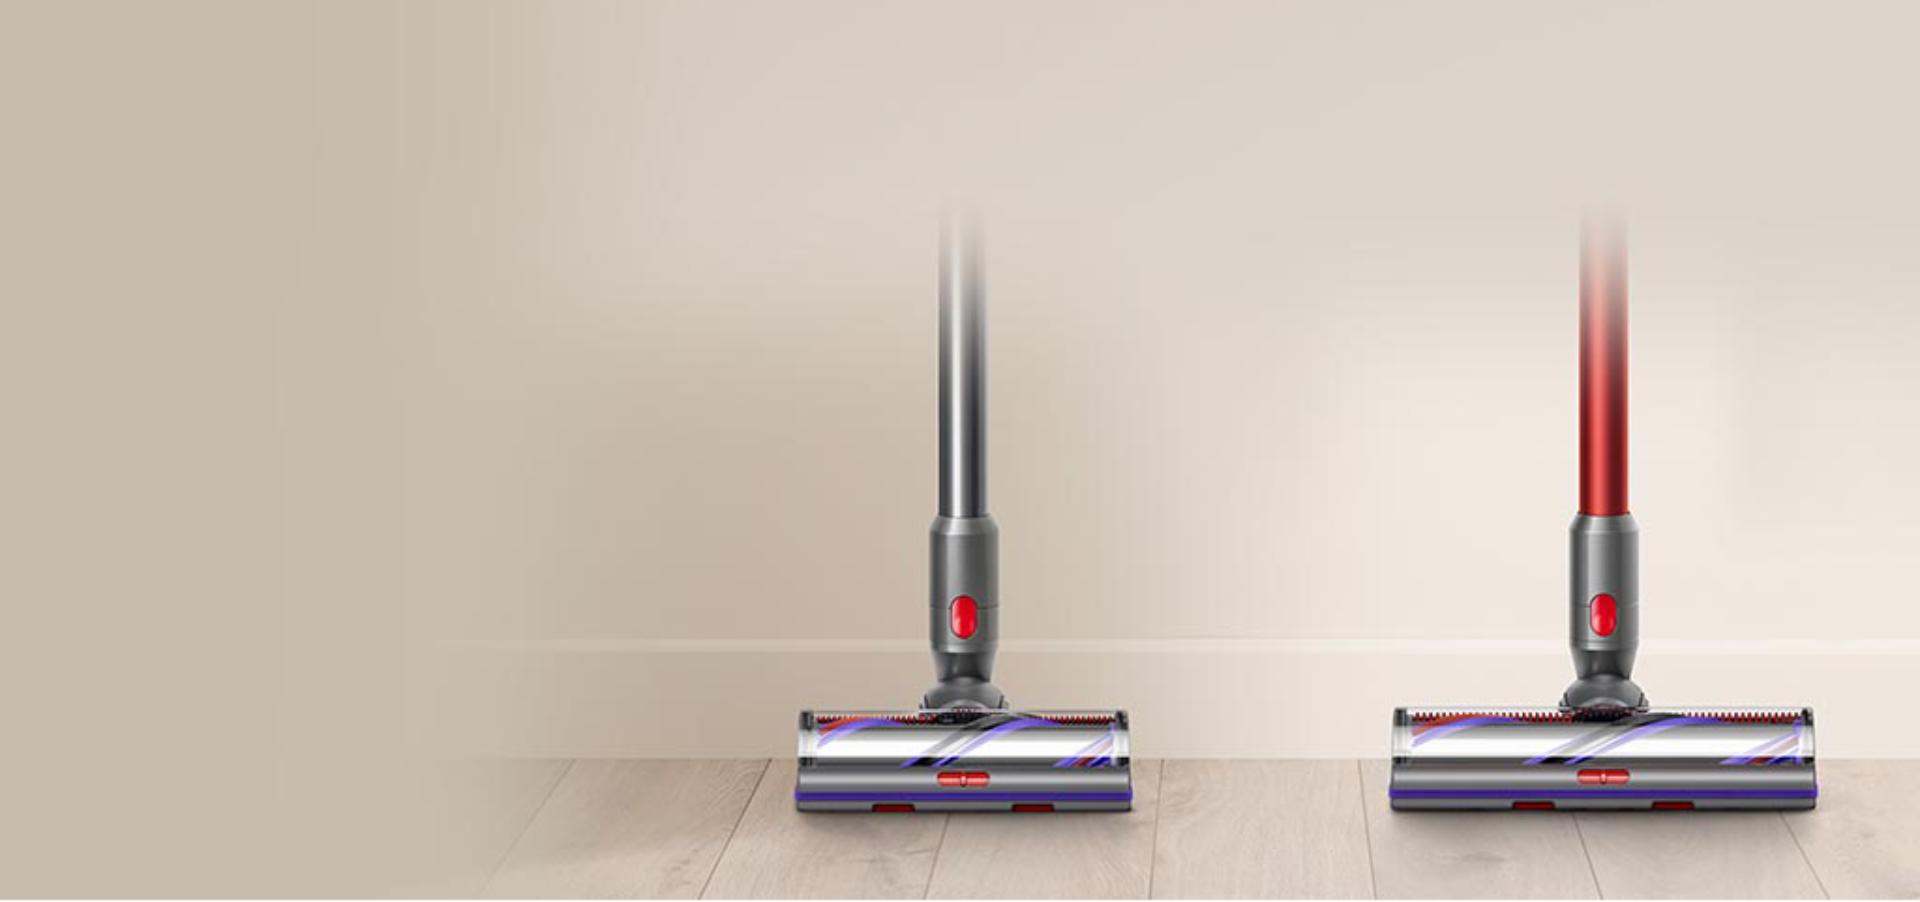 Image of Dyson V11 Absolute Extra next to Dyson Outsize showing differences in cleaner head size